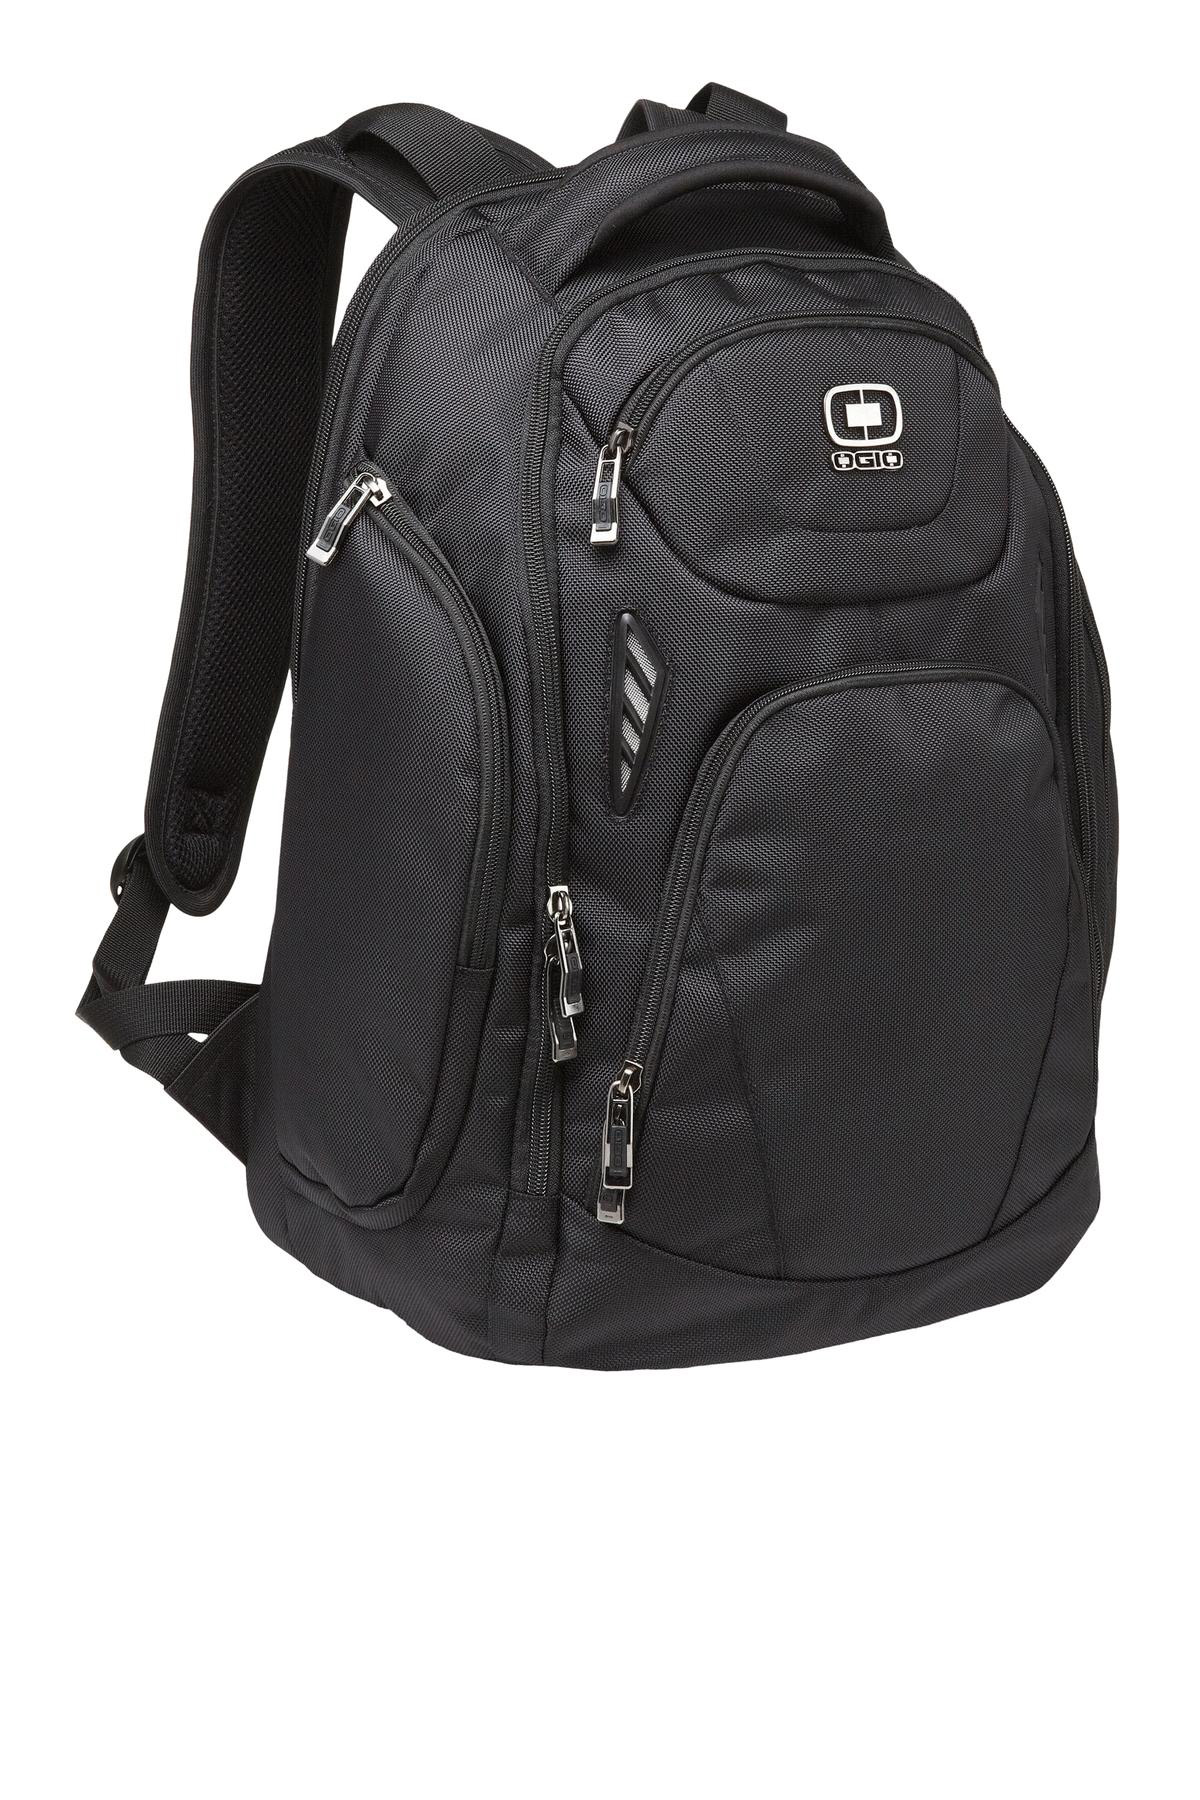 OGIO - Voyager Messenger, Product